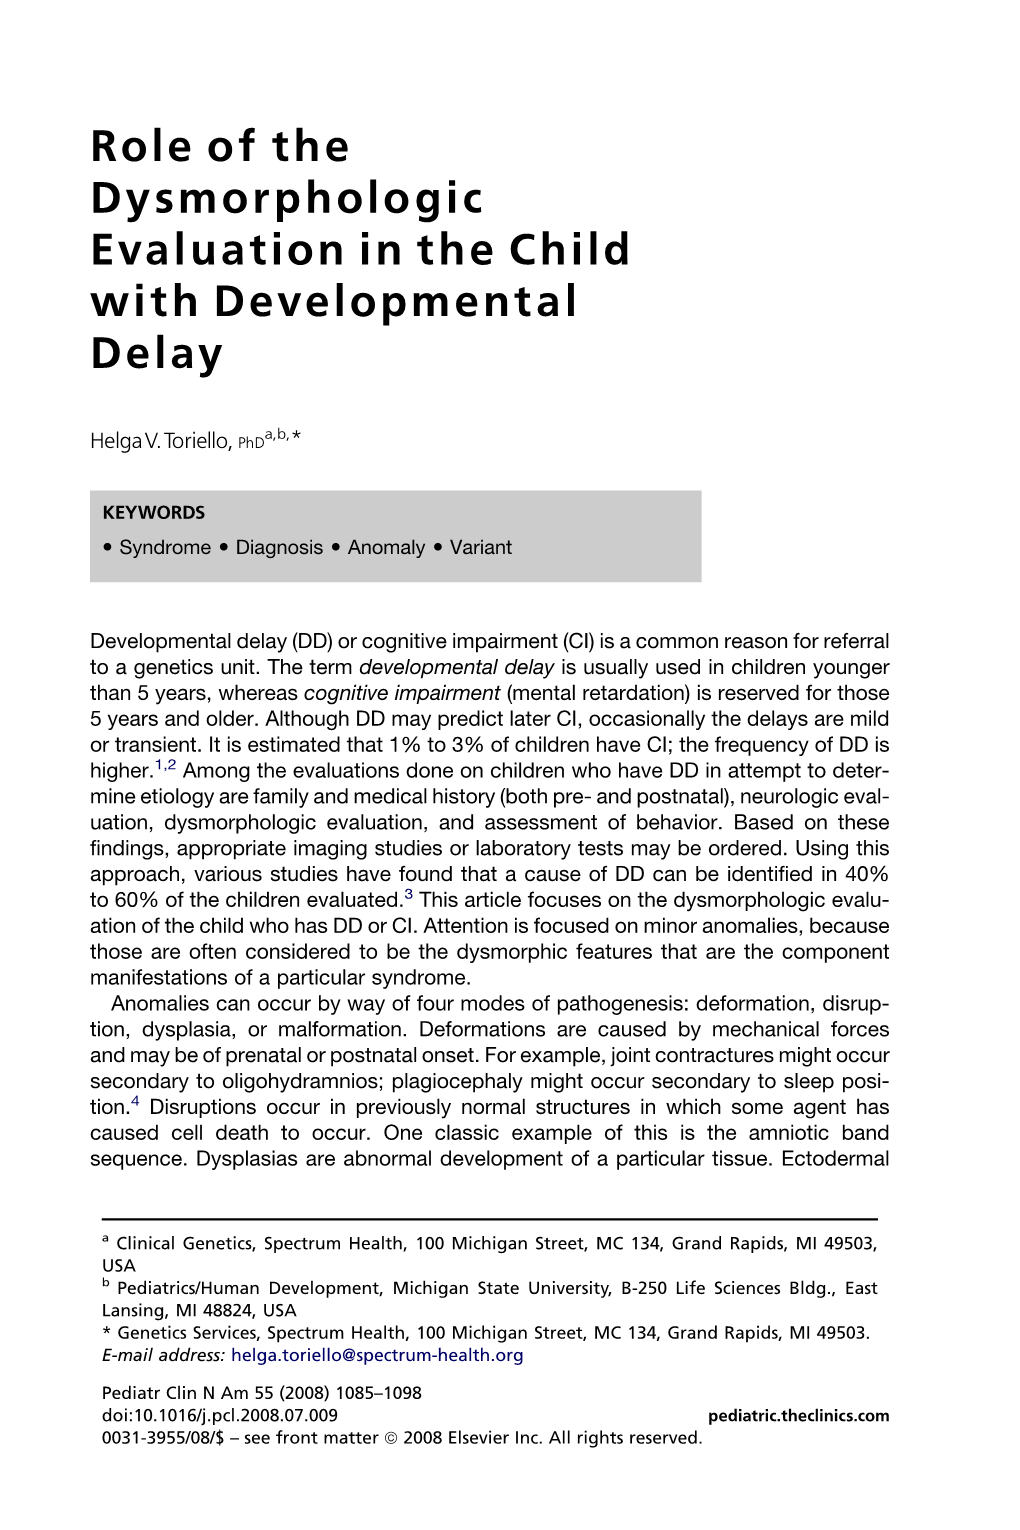 Role of the Dysmorphologic Evaluation in the Child with Developmental Delay